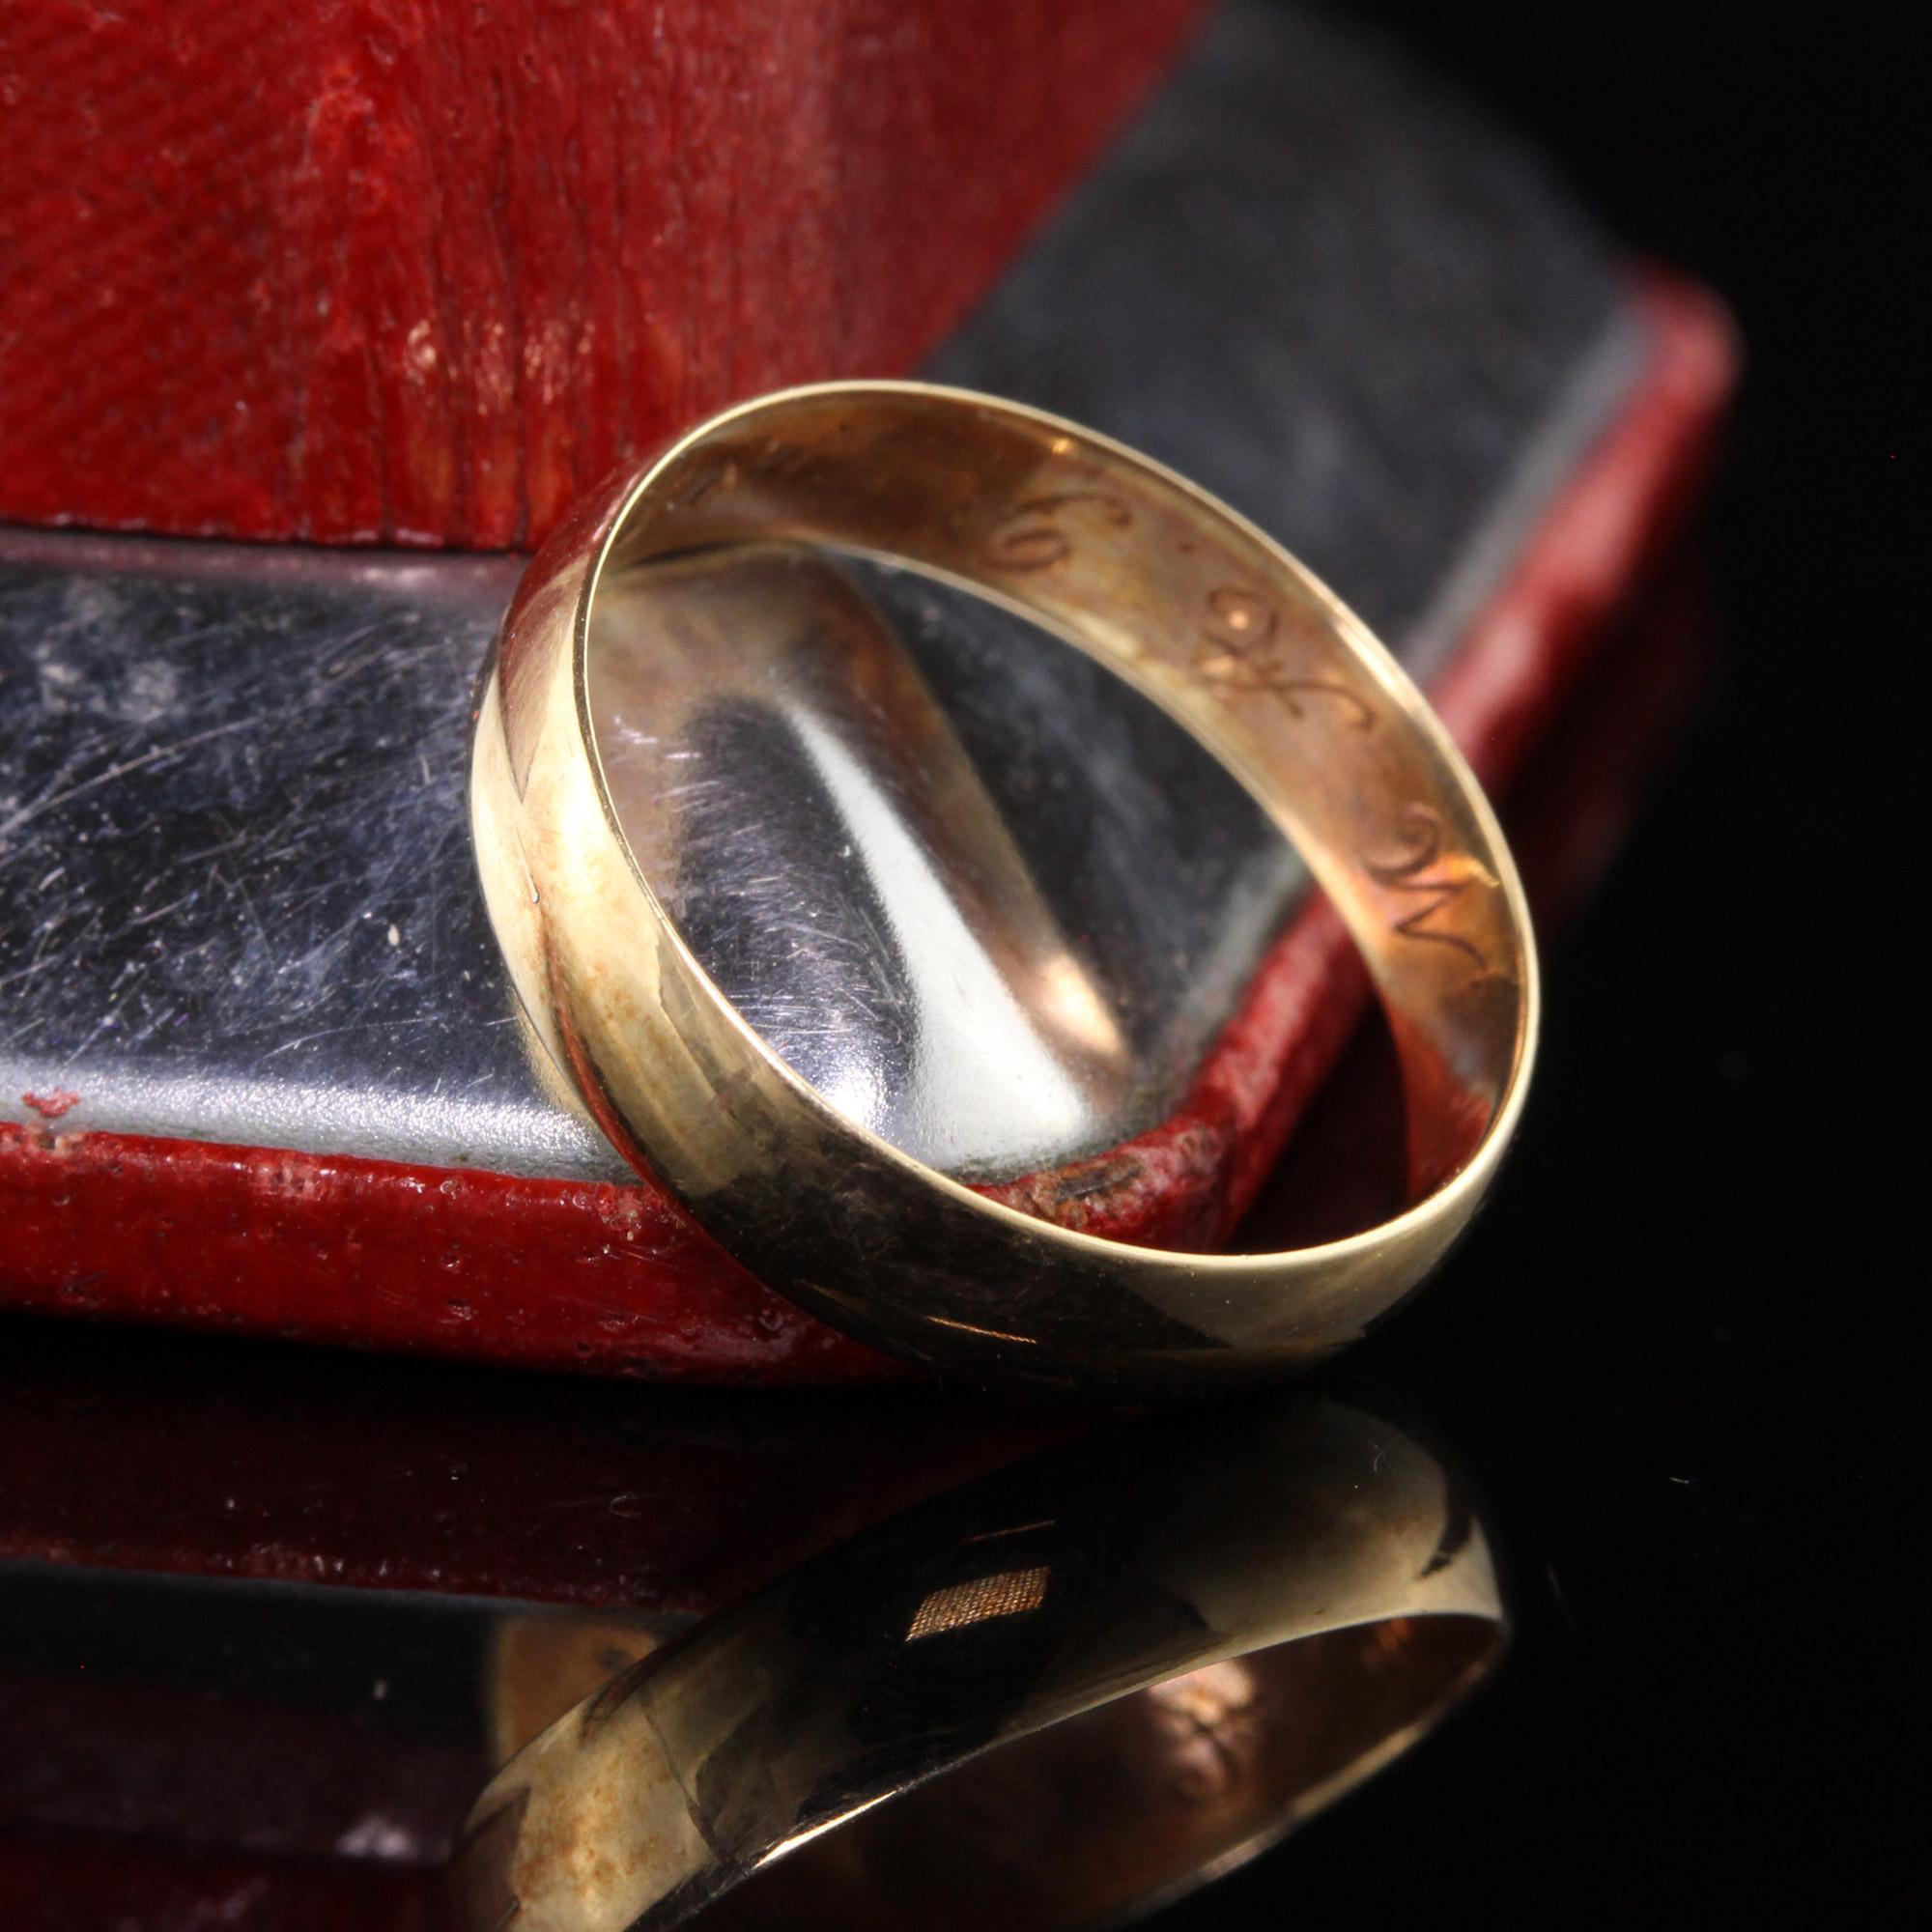 Beautiful Antique Victorian 14K Yellow Gold Engraved Wedding Band - Size 4 1/4. This classic wedding band is simple but holds so much history. The band is engraved 